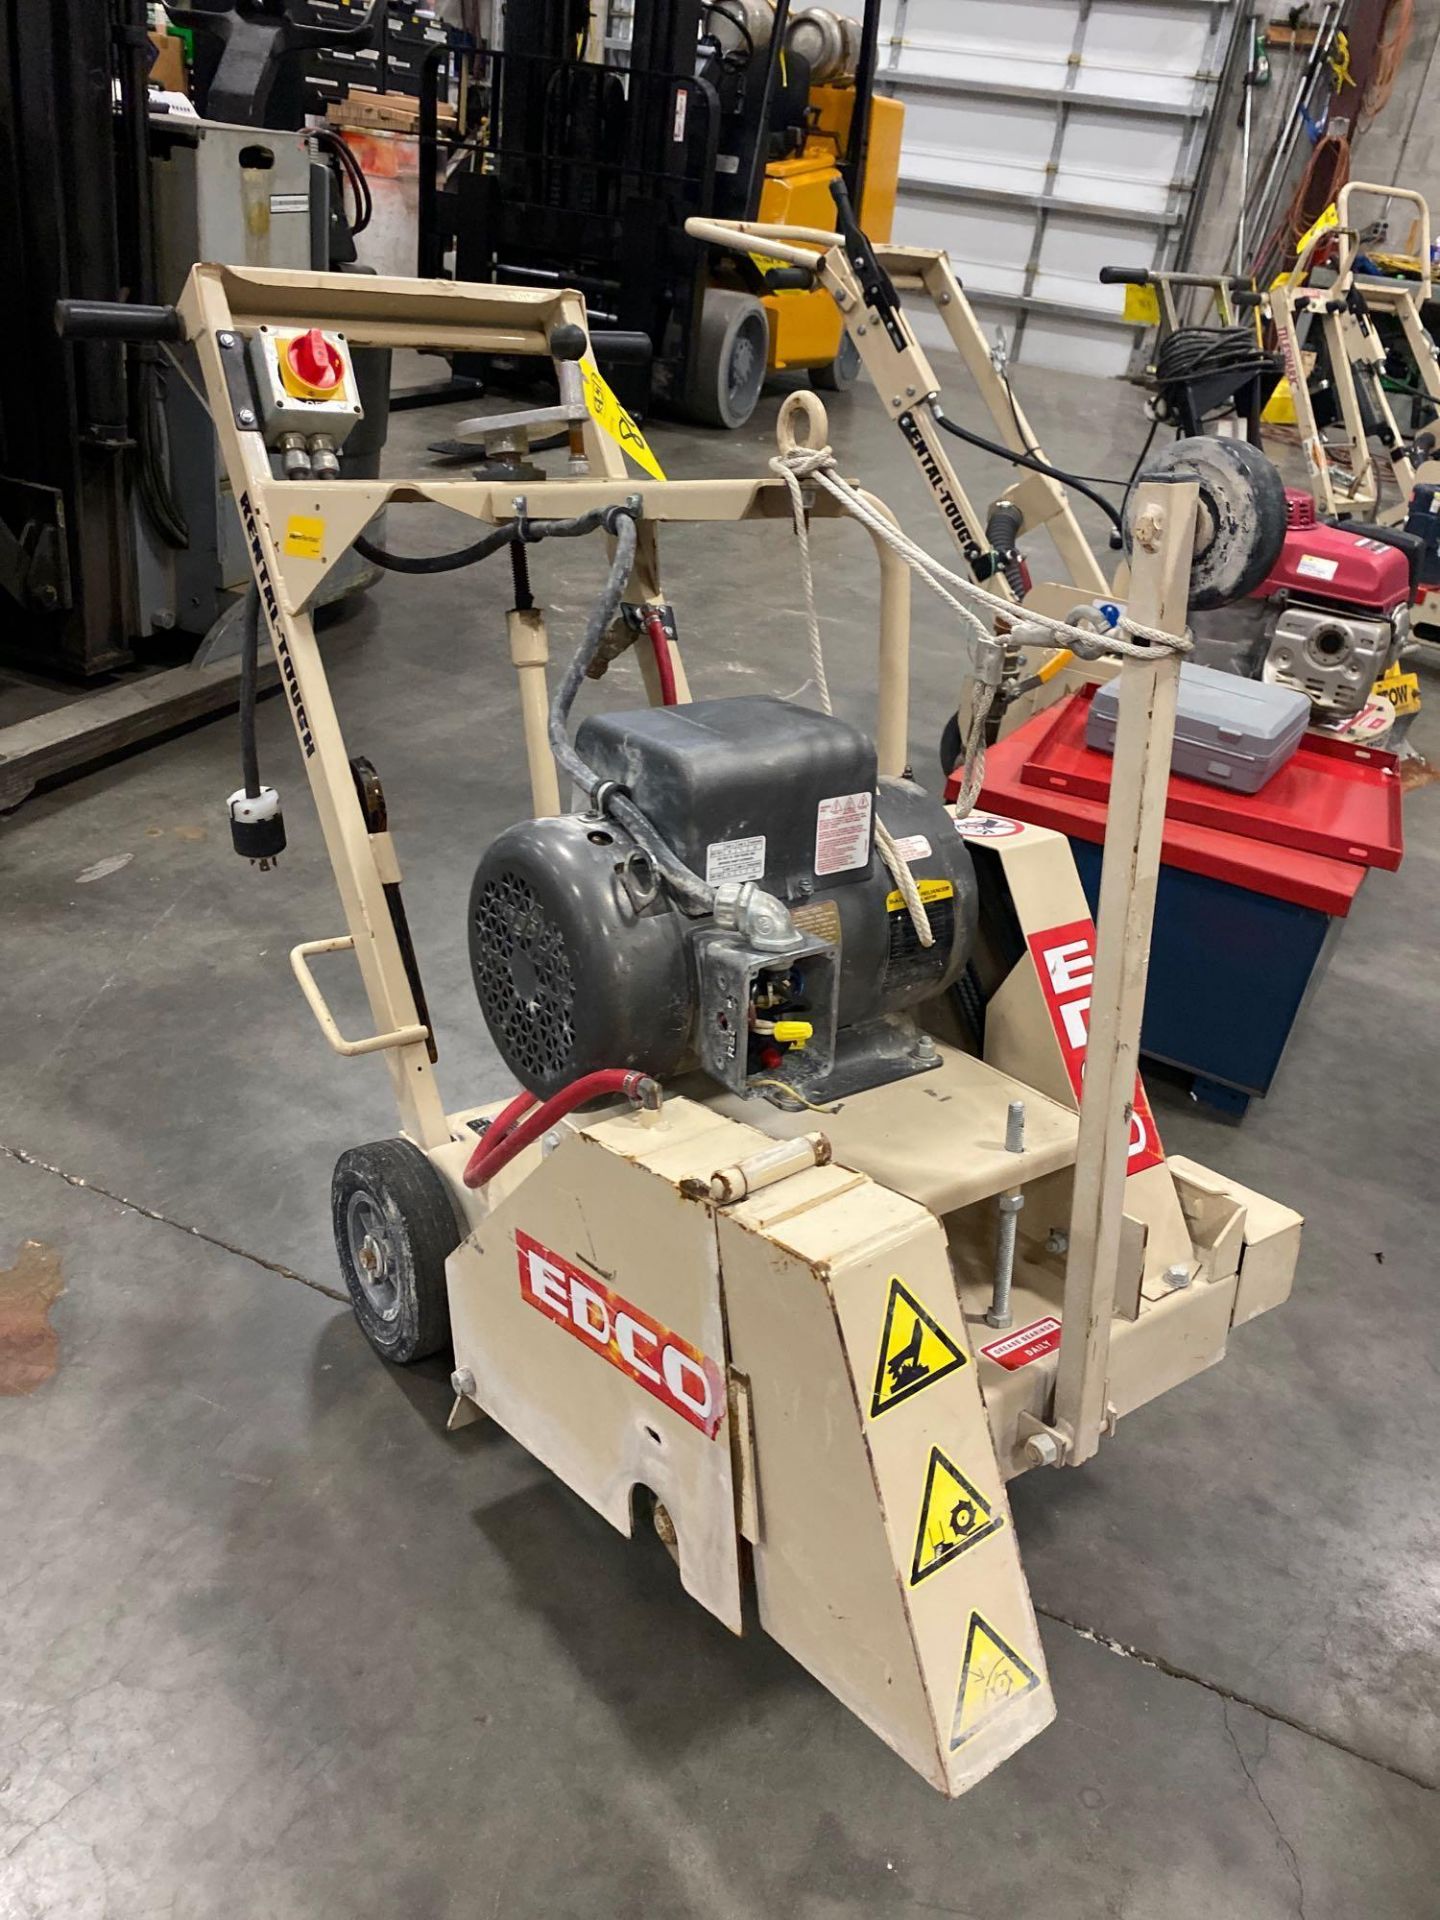 2017 EDCO DS-18-5 WALKBEHIND SAW SUPPORT EQUIPMENT - Image 14 of 20